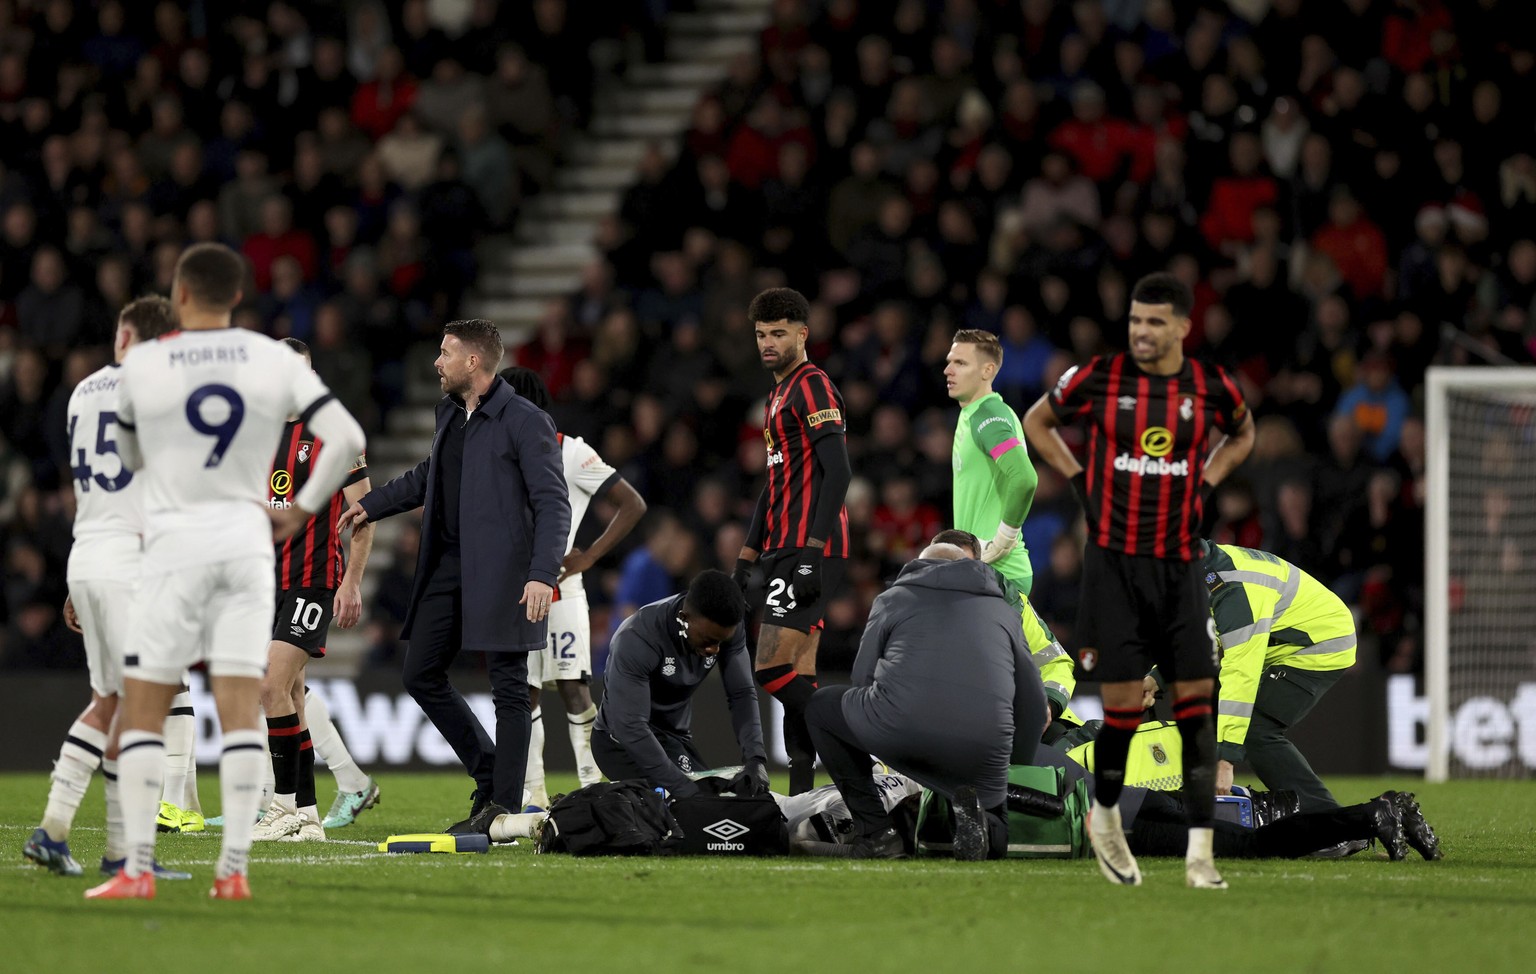 Luton Town manager Rob Edwards on the pitch as his player Tom Lockyer receives treatment during the English Premier League soccer match between Bournemouth and Luton Town at the Vitality Stadium, in B ...